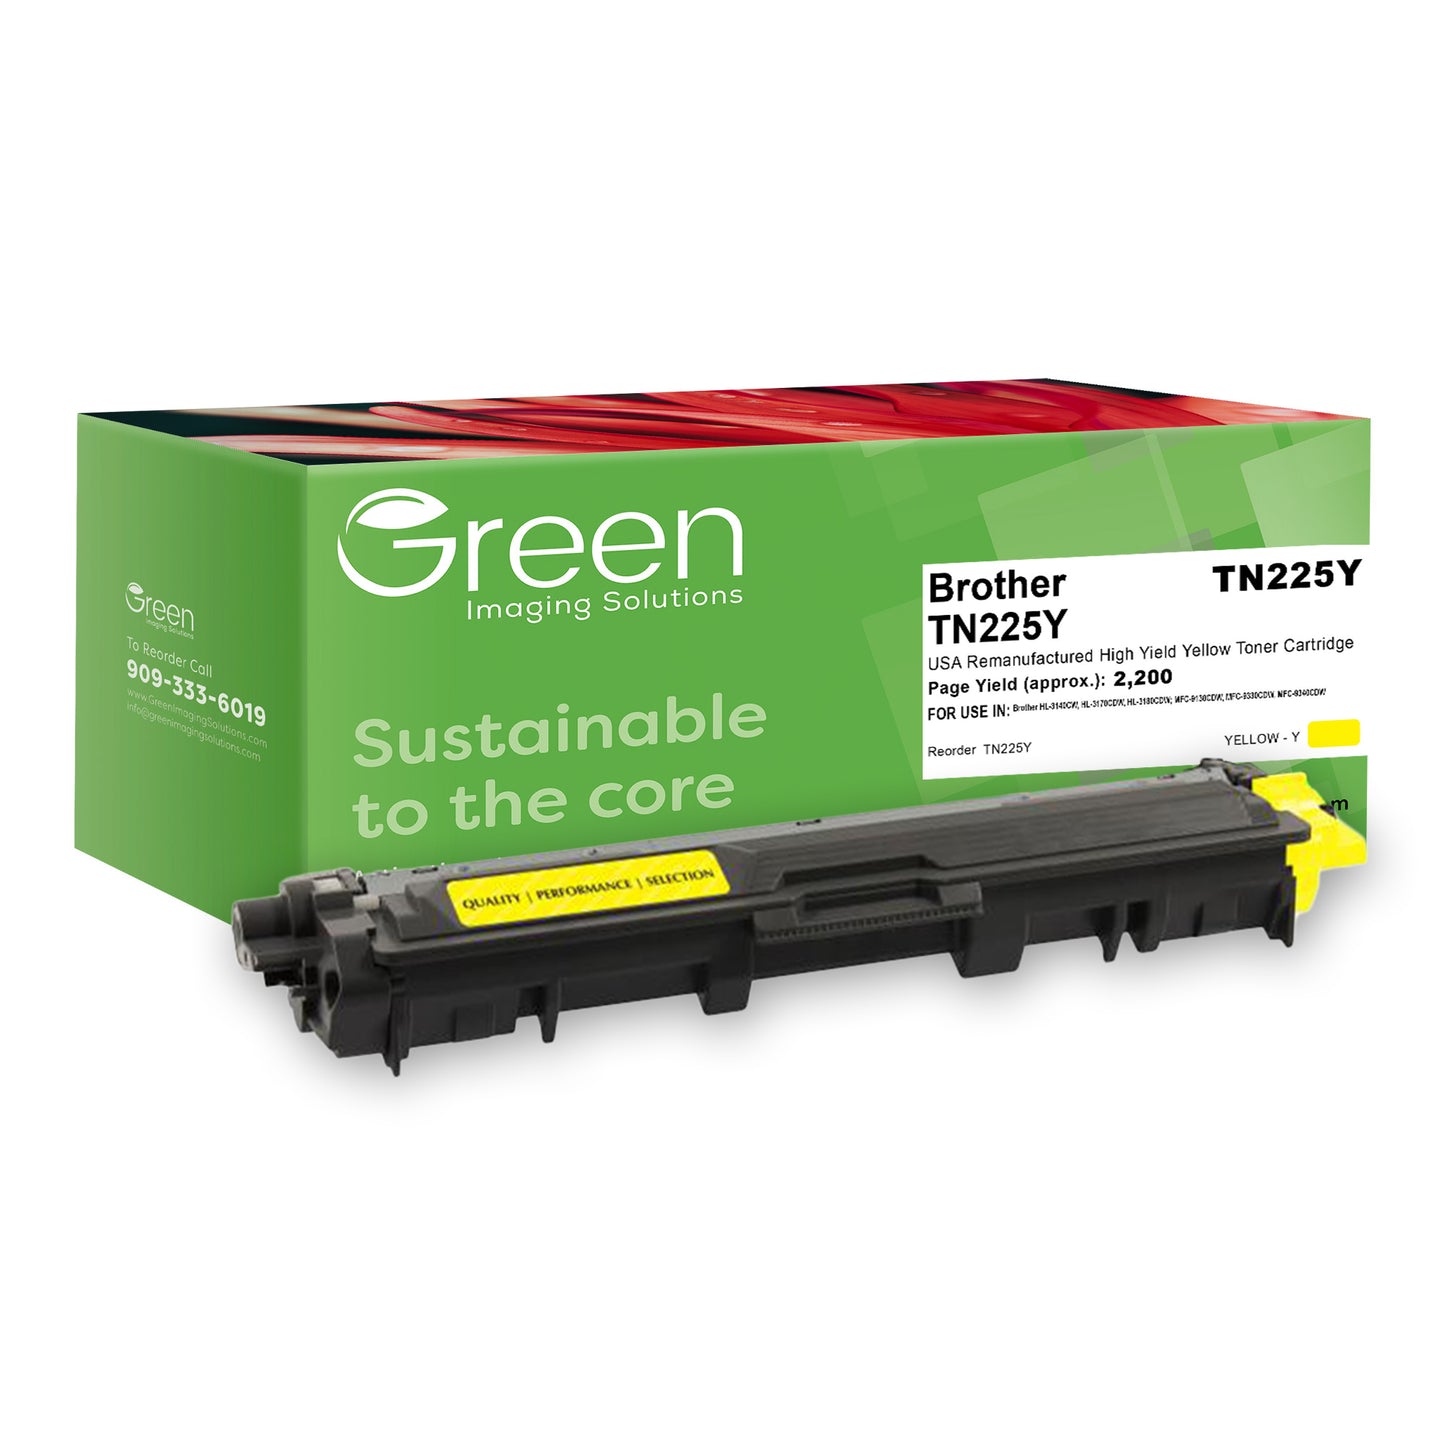 Green Imaging Solutions USA Remanufactured High Yield Yellow Toner Cartridge for Brother TN225